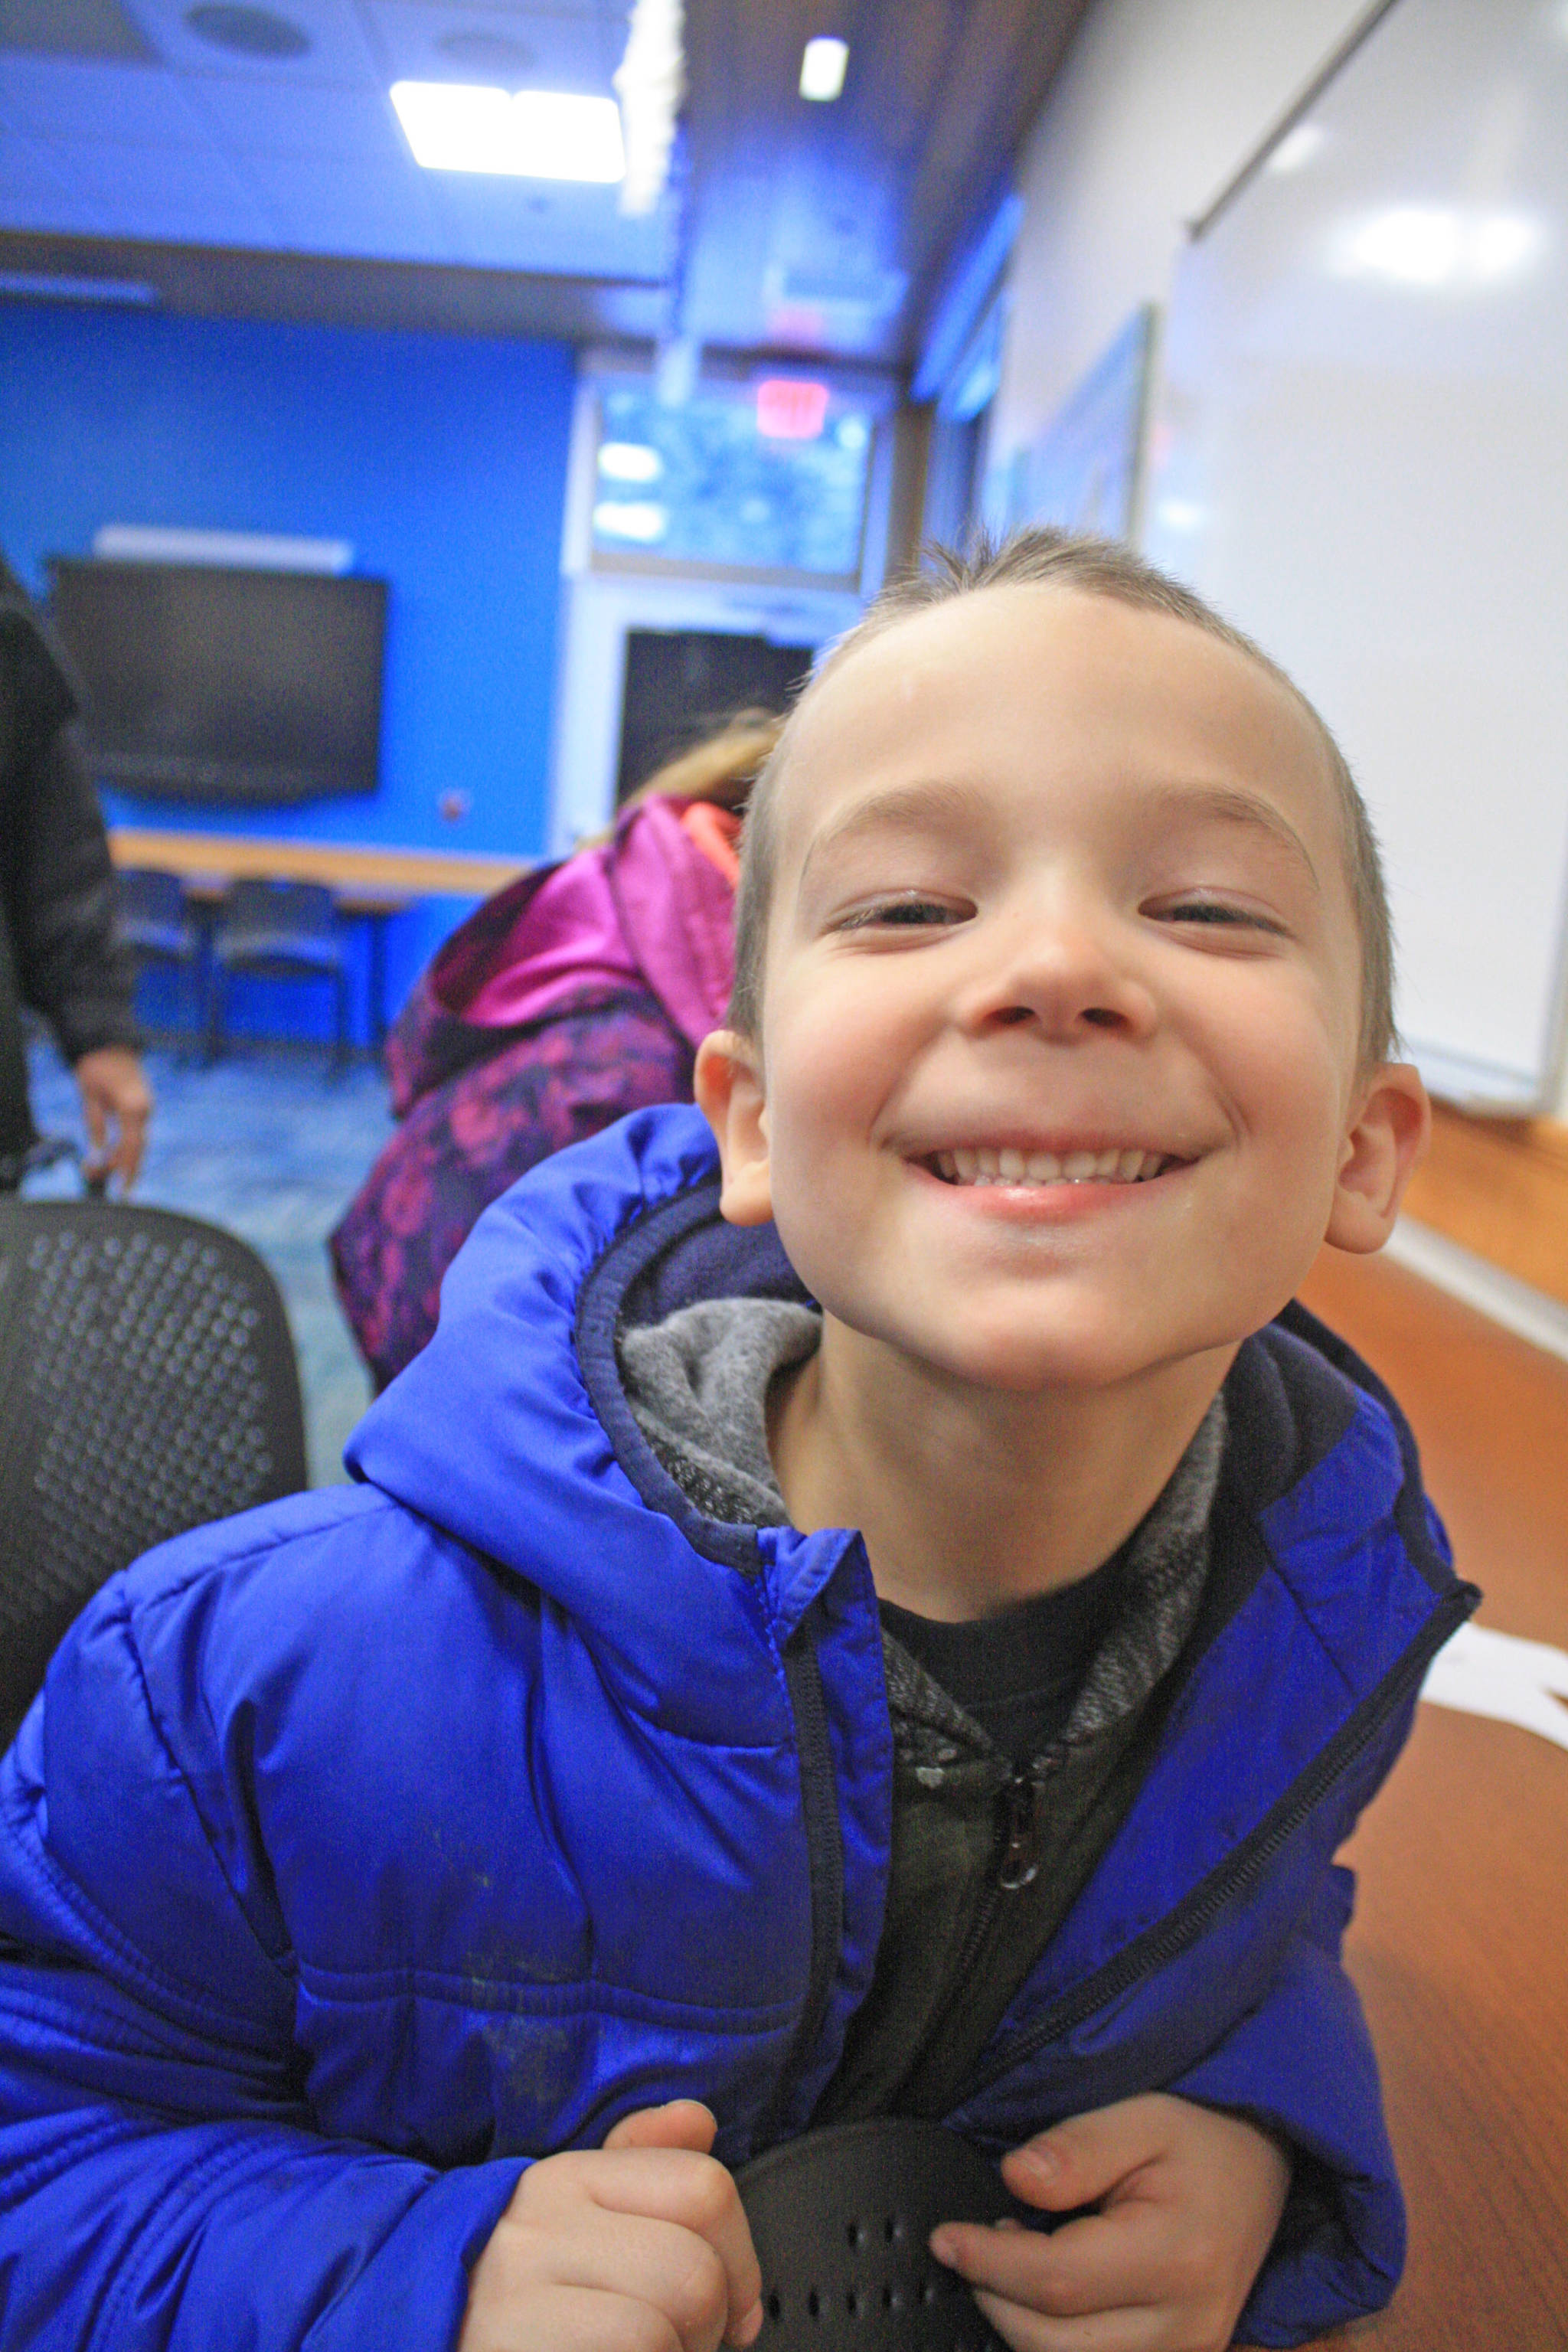 Phillip Larson, 6, takes a break from crafts at the Kenai National Wildlife Refuge Visitor Center on Dec. 27. The visitor center hosted an afternoon of family-friendly activities. (Photo by Erin Thompson/Peninsula Clarion)